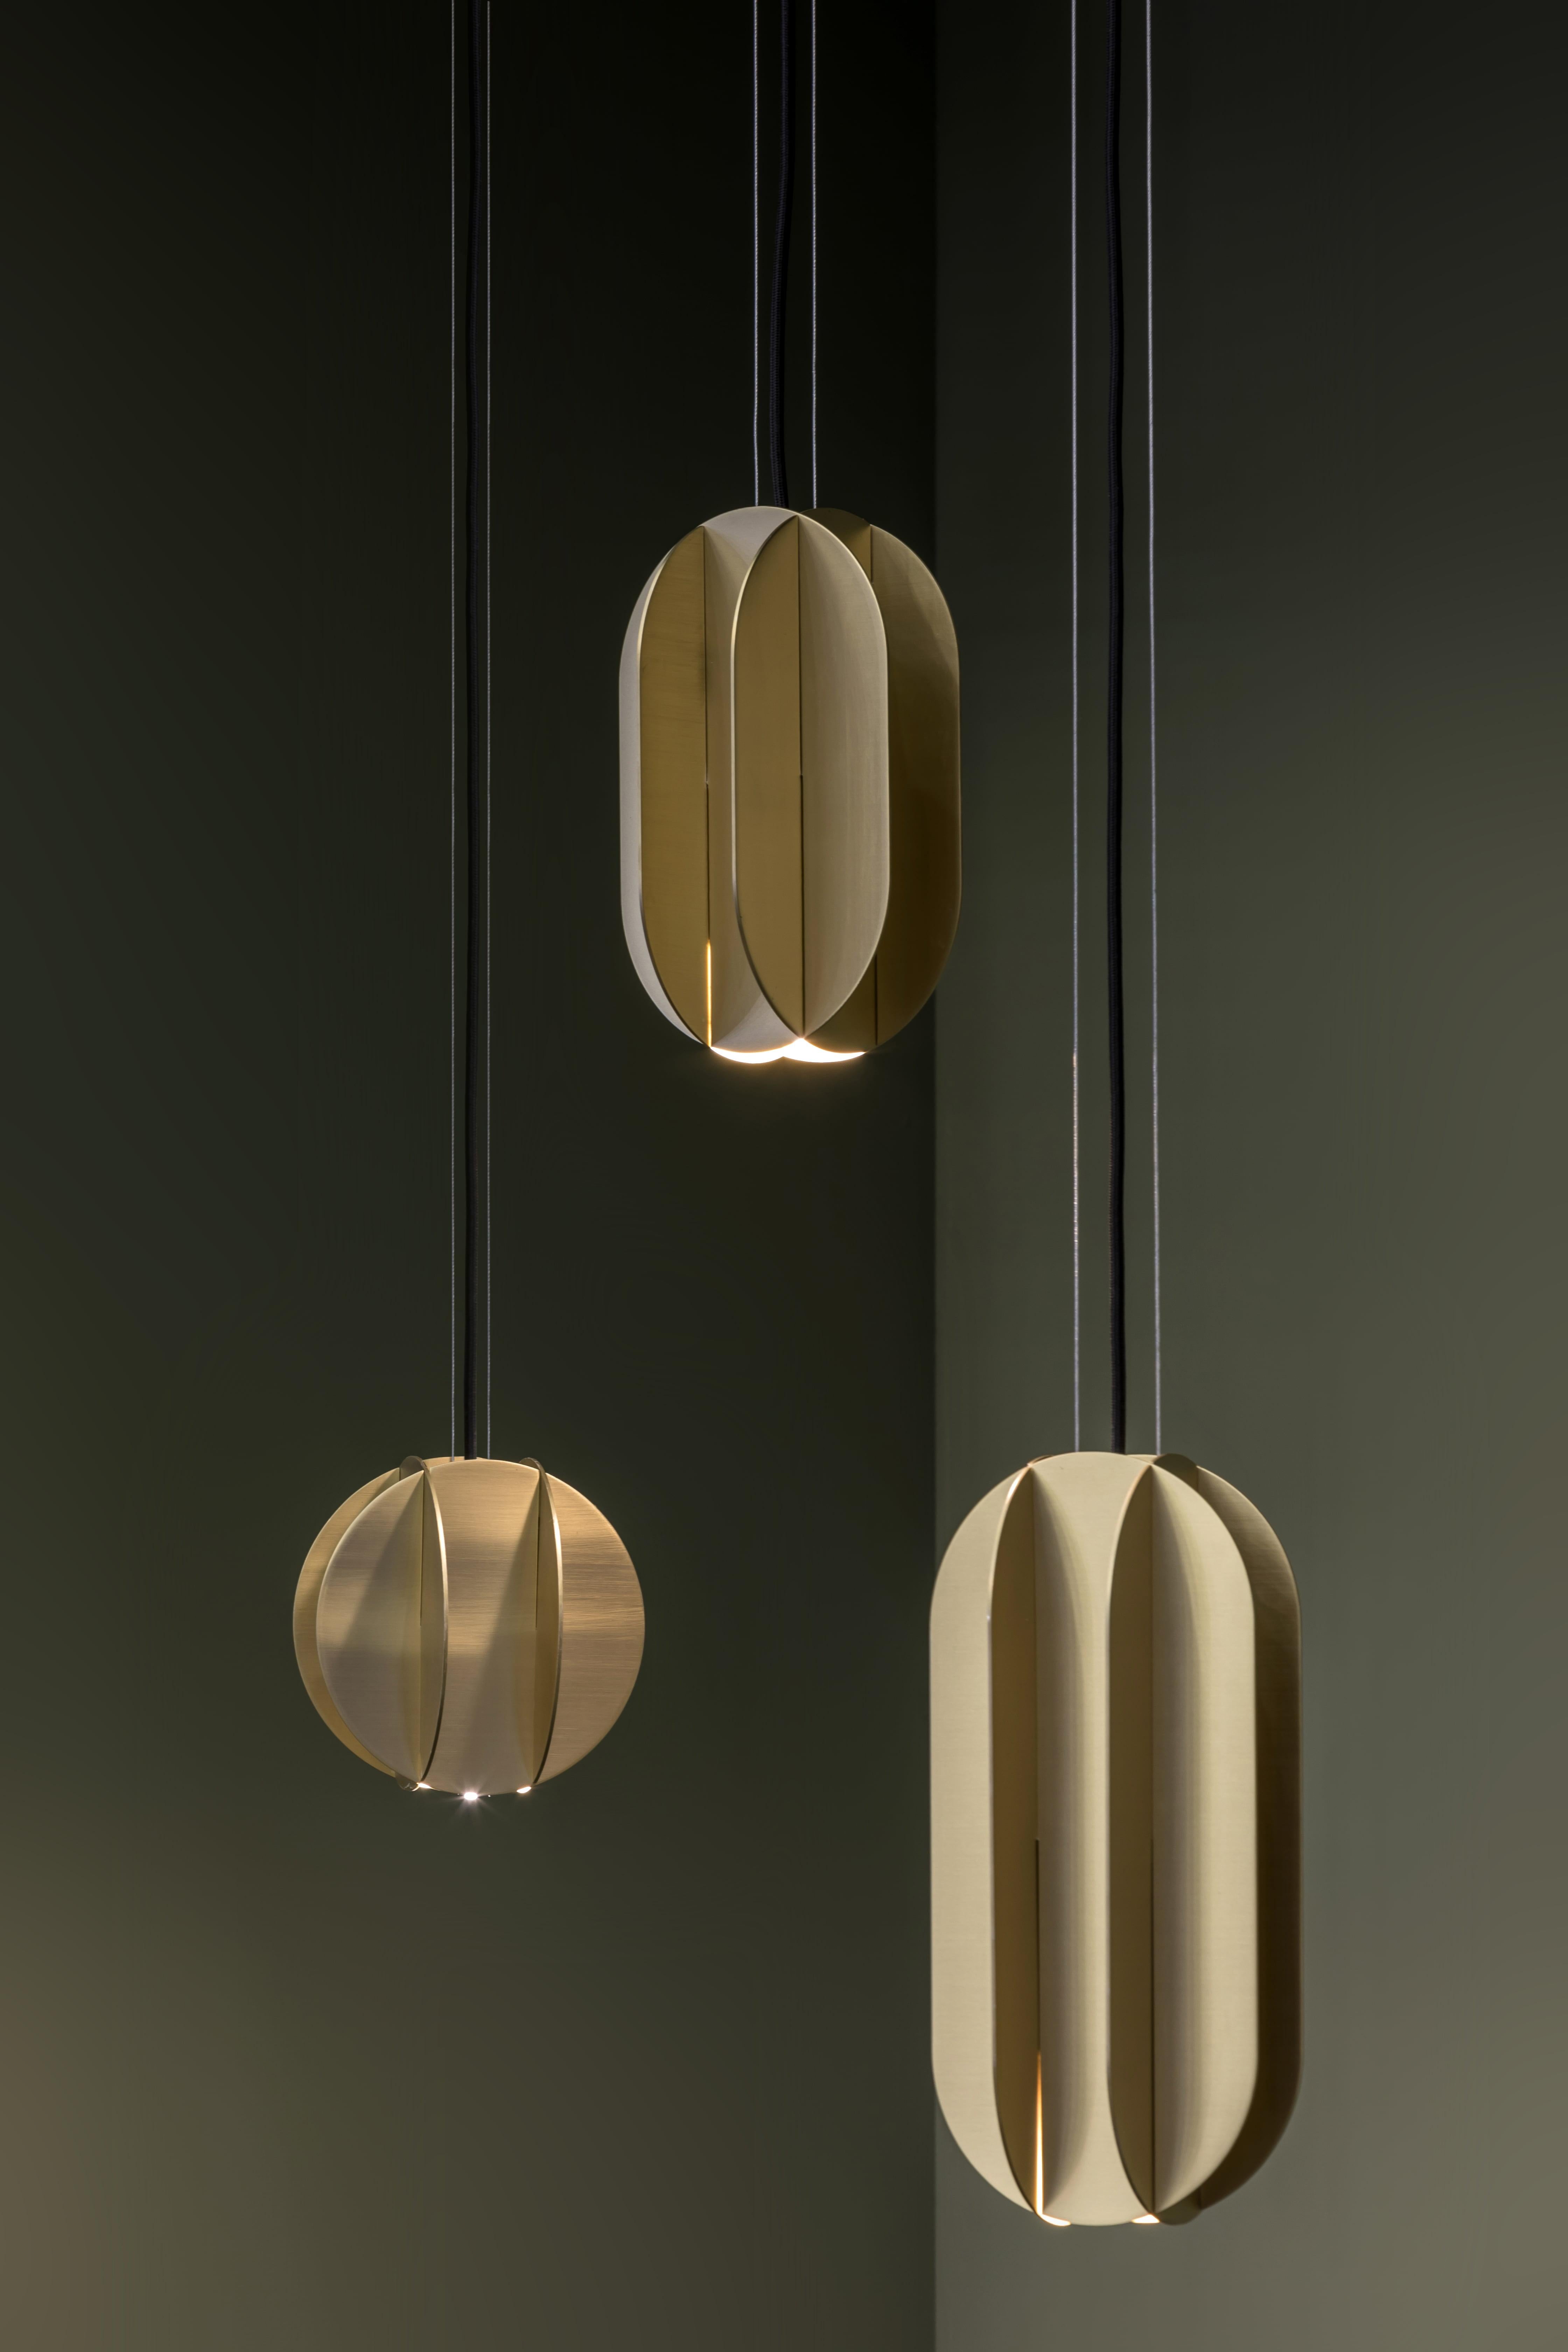 EL collection of lighting is inspired by the geometric works of the great Suprematist artists El Lissitzky and Kazimir Malevich. Suprematism is a modernist movement in the art of the early 20th century, focused on the basic geometric forms, such as